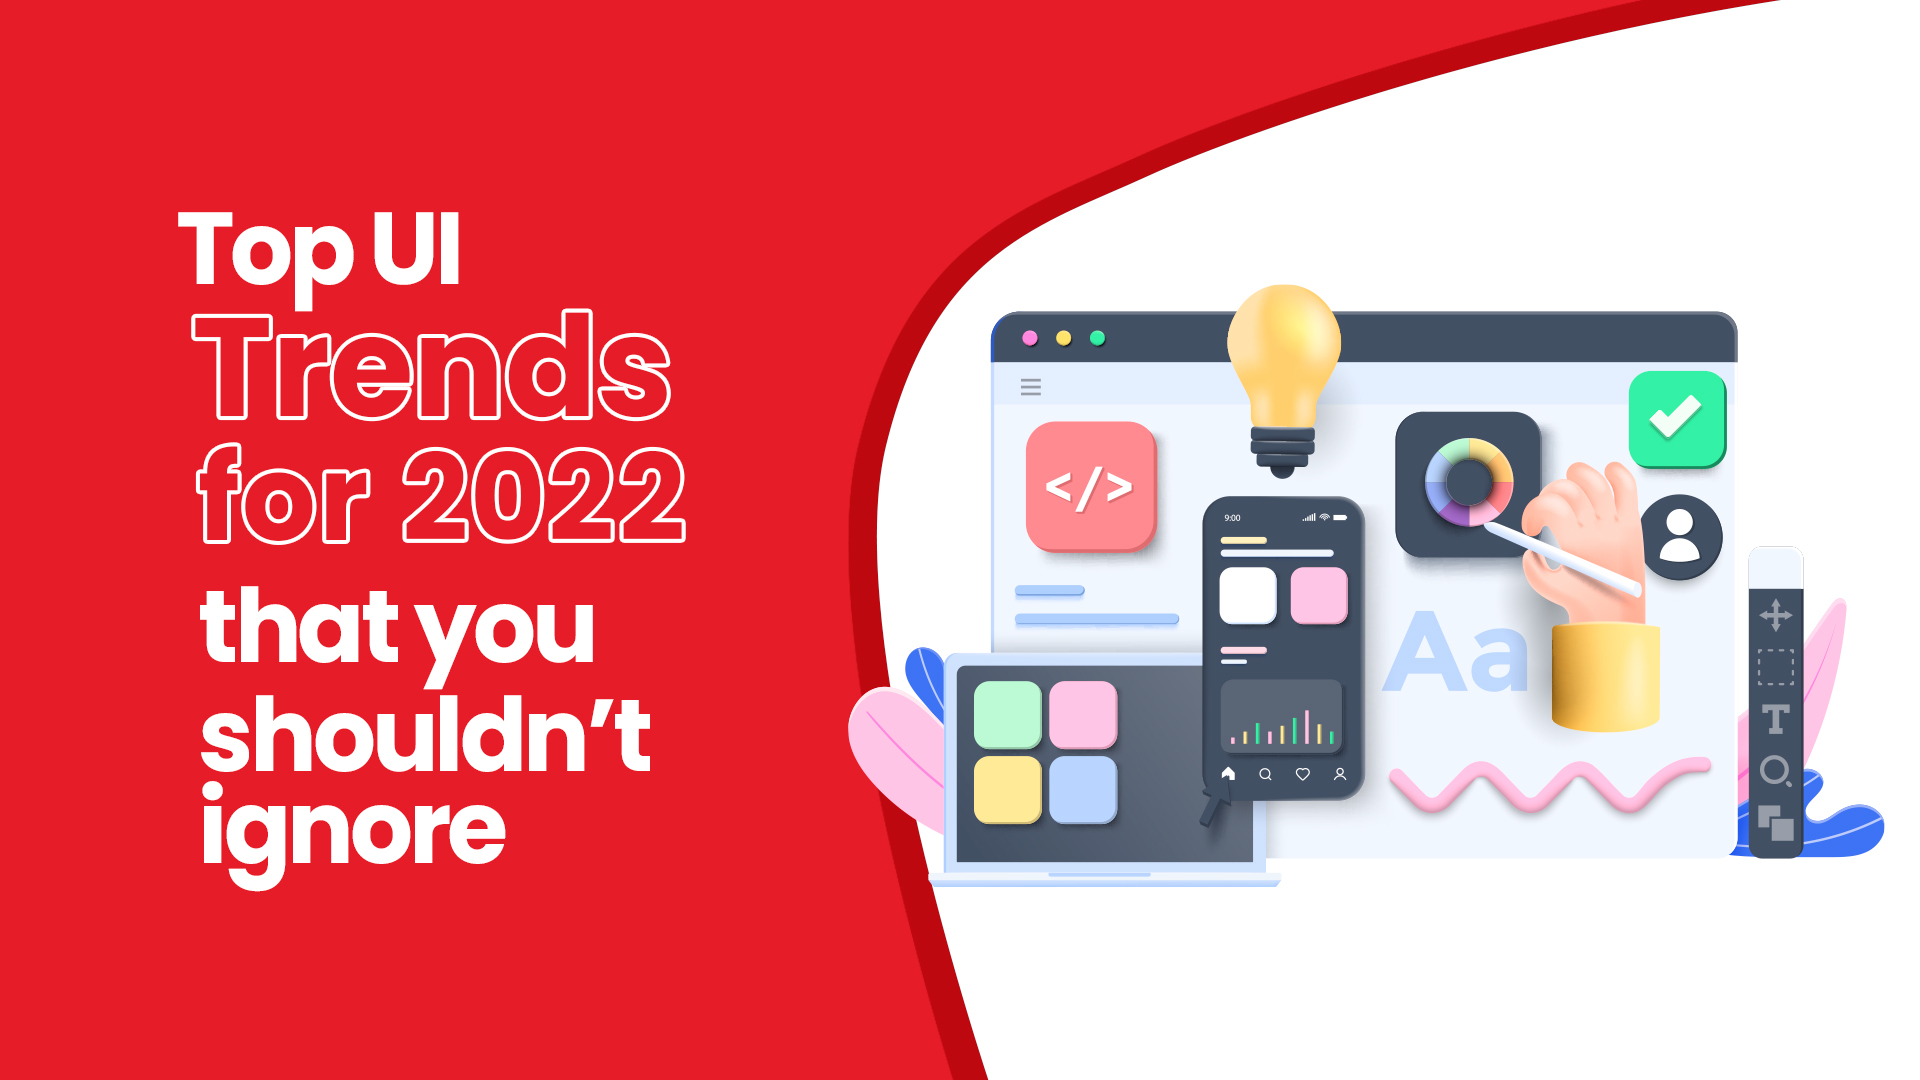 Top UI Trends For 2022 That You Shouldn’t Ignore